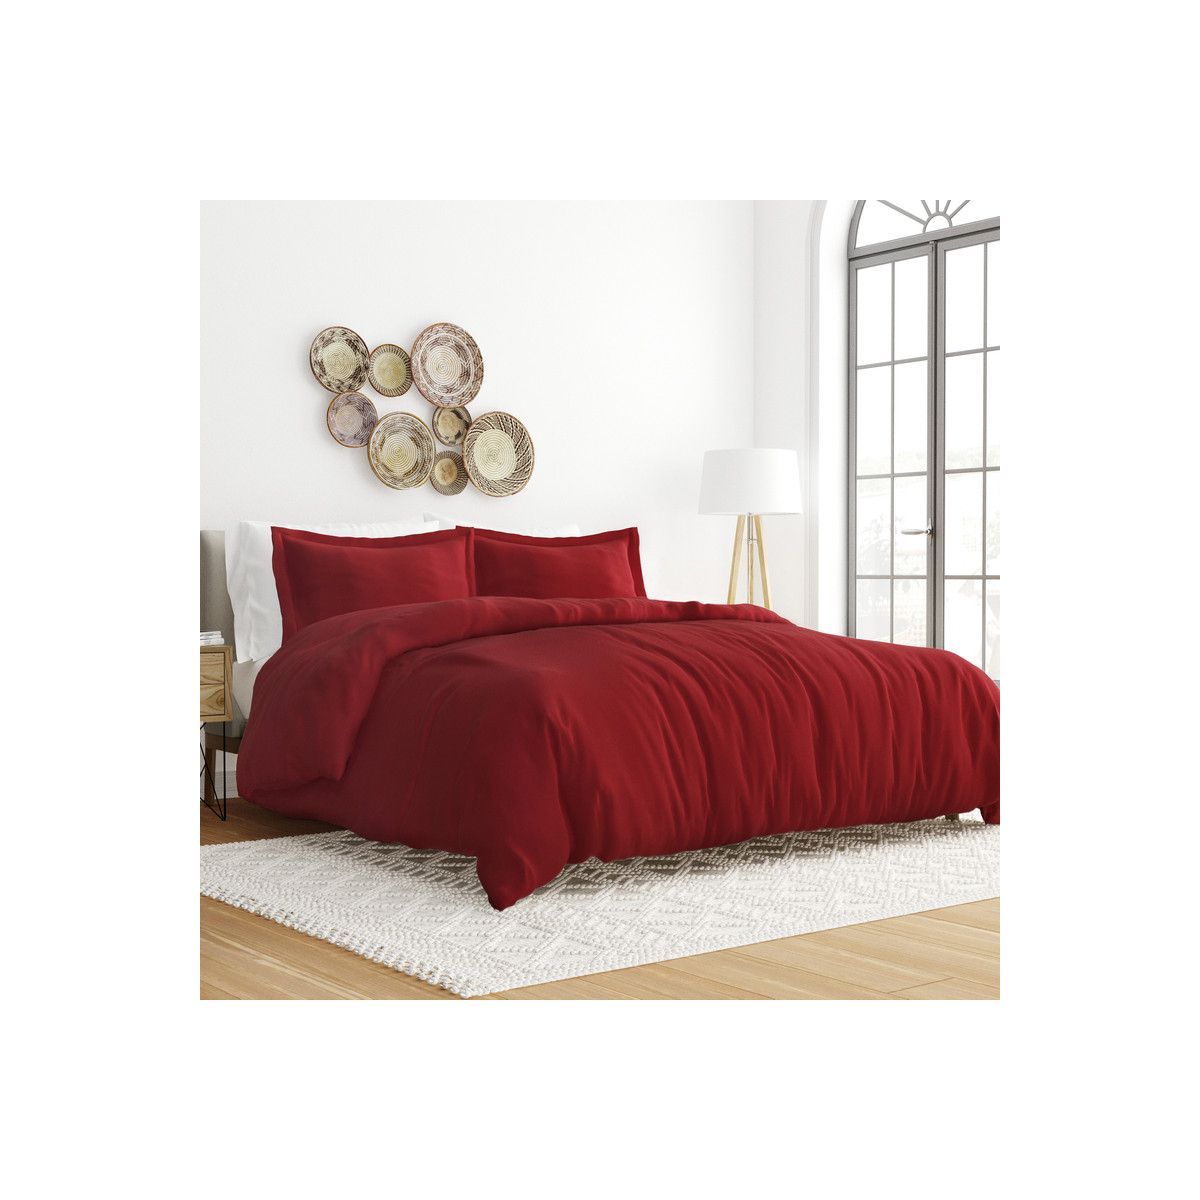 Solid 3 Piece Duvet Cover Sets, 19 Colors - Ultra Soft, Easy Care, Wrinkle Free - Becky Cameron | Target